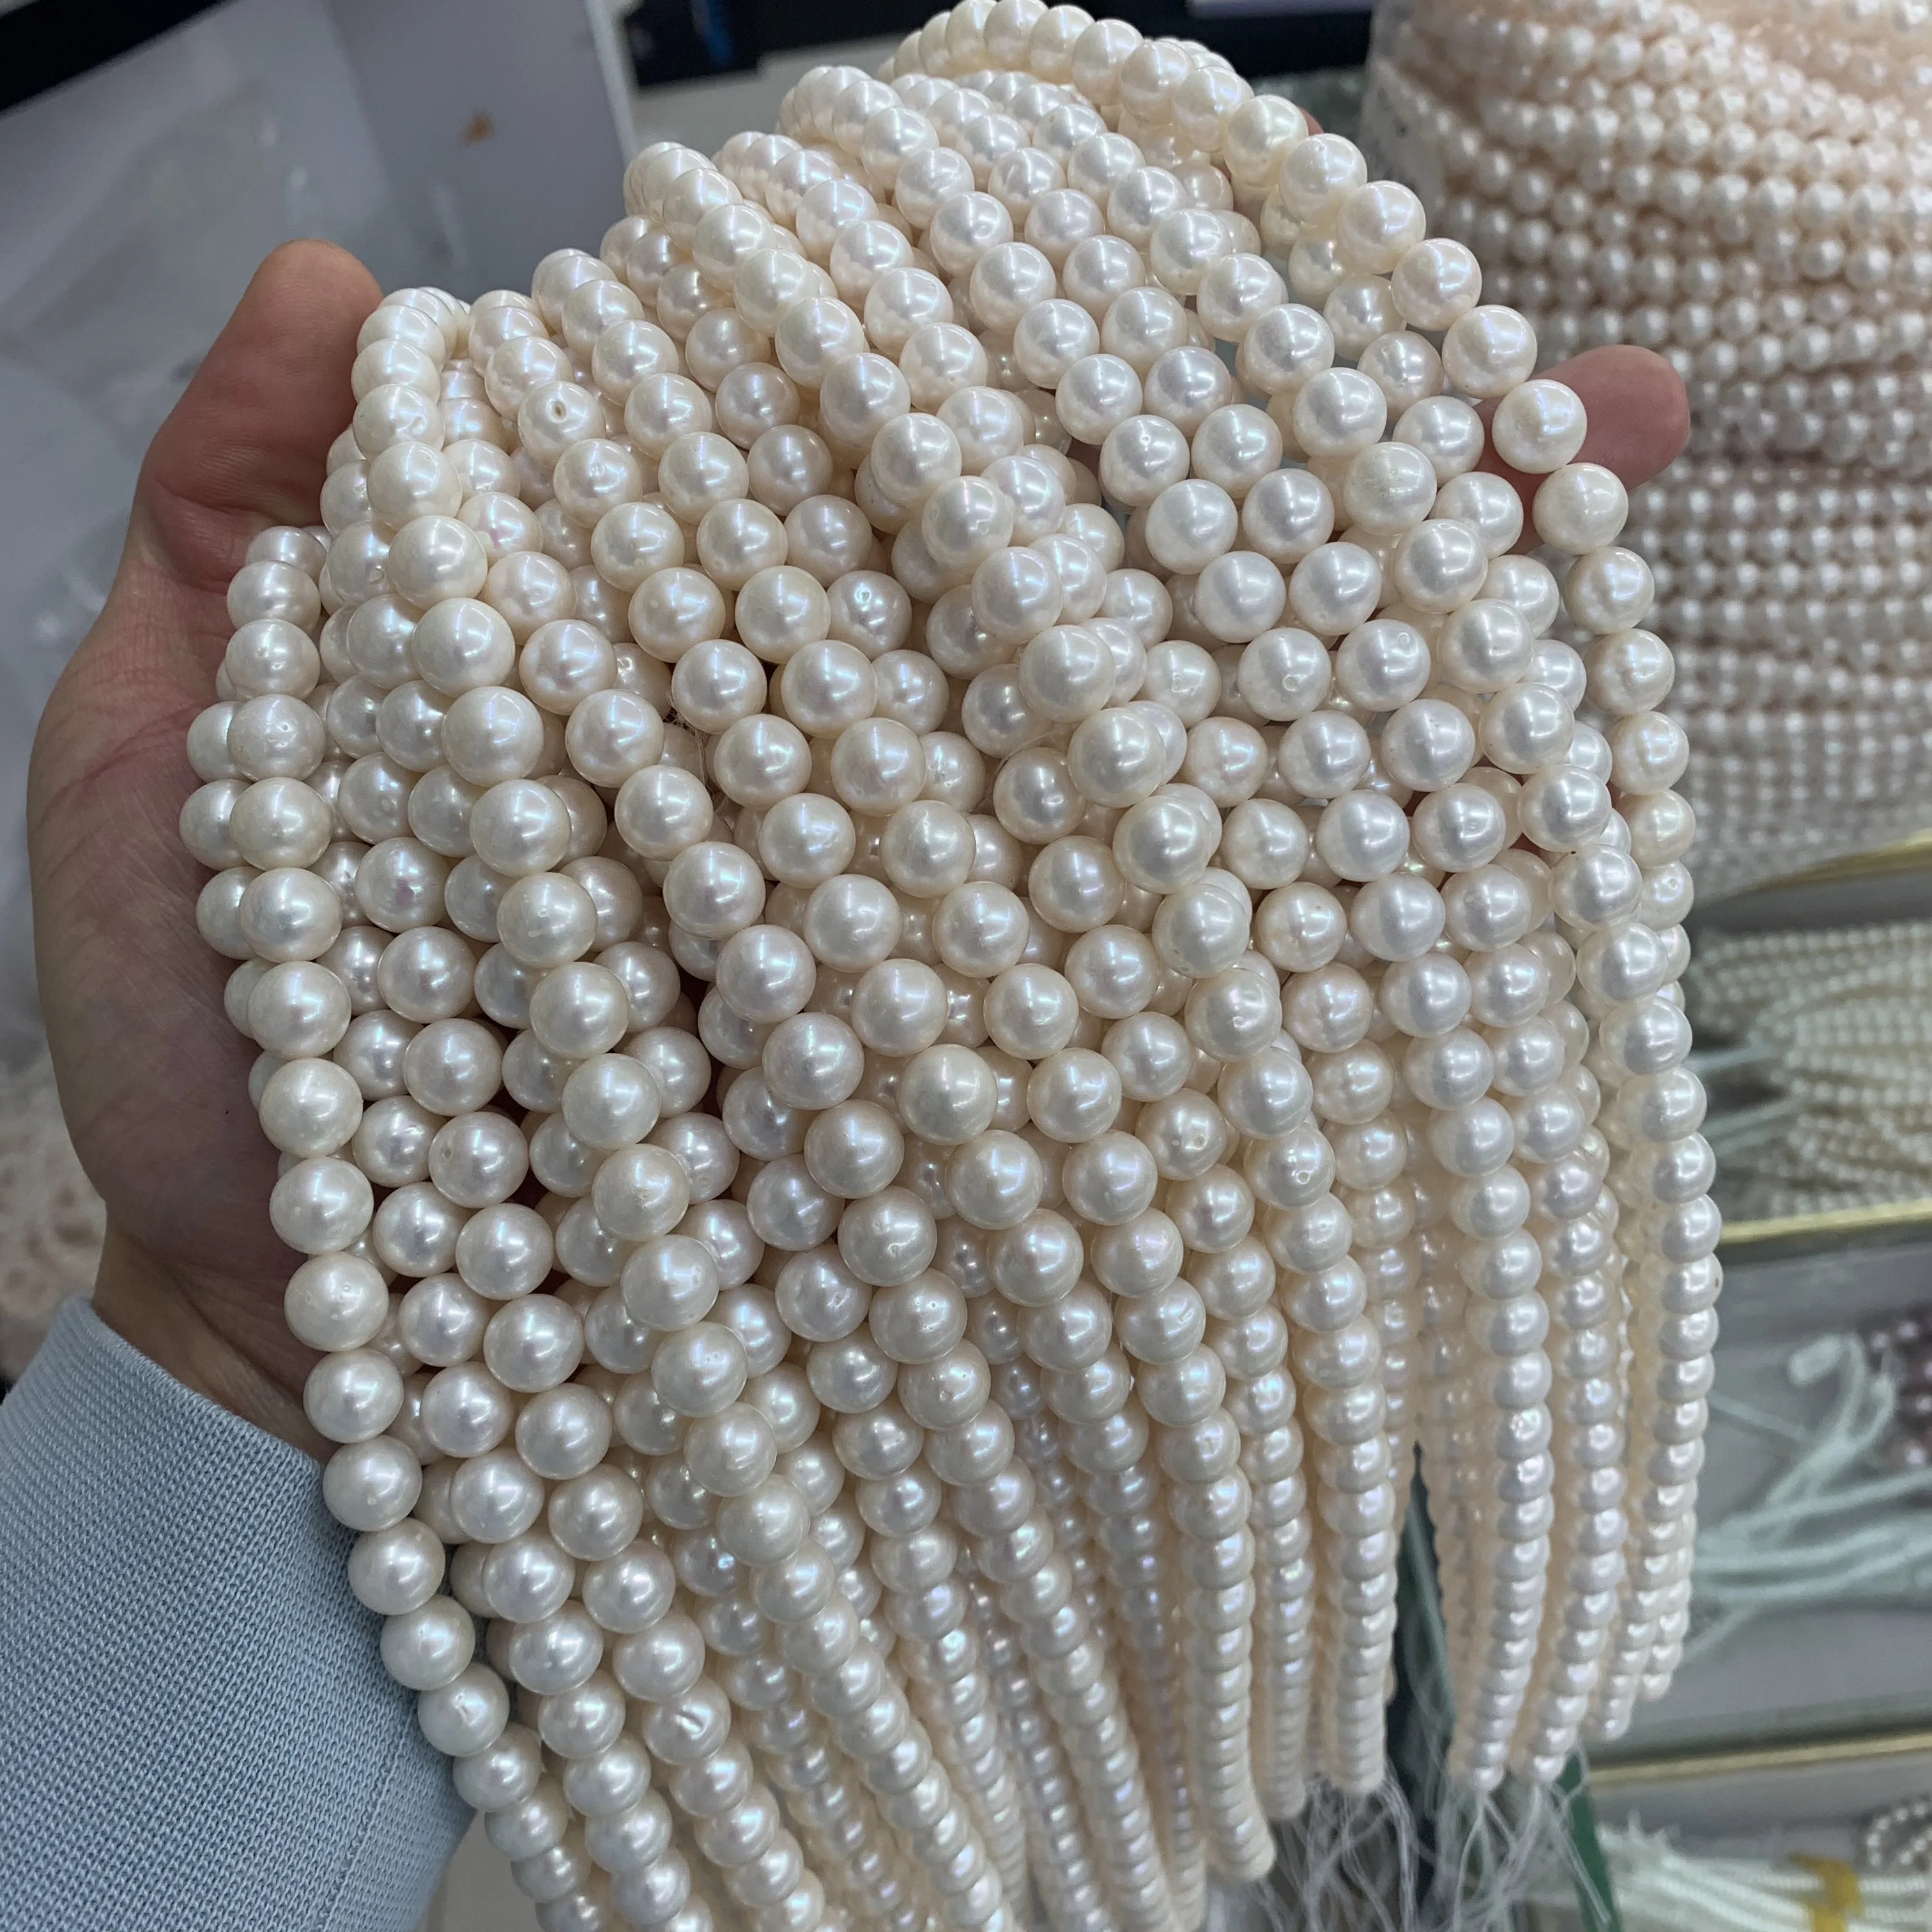 

2022 hot sale 9-11mm cultured freshwater pearl strand natural round pearls wholesale string for DIY bracelet necklace jewelry